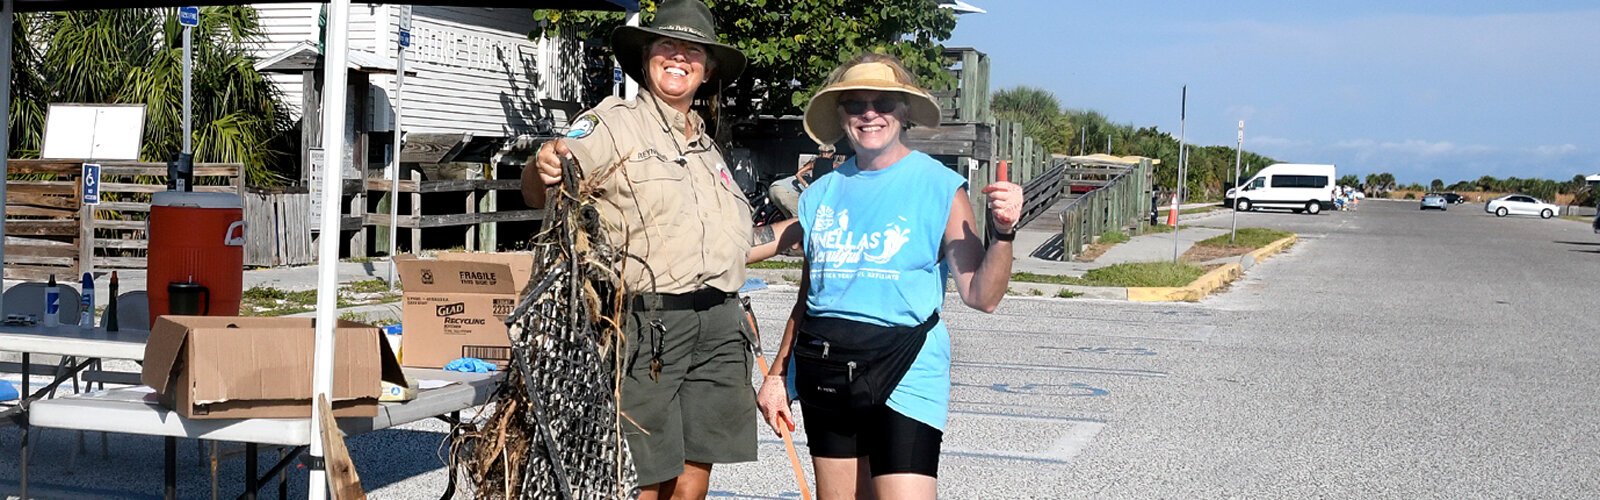 Park services specialist Beth Reynolds congratulates Barbara Piltaver, an Illinois native living part-time in Dunedin, for being the first volunteer to return from the beach with large pieces of debris